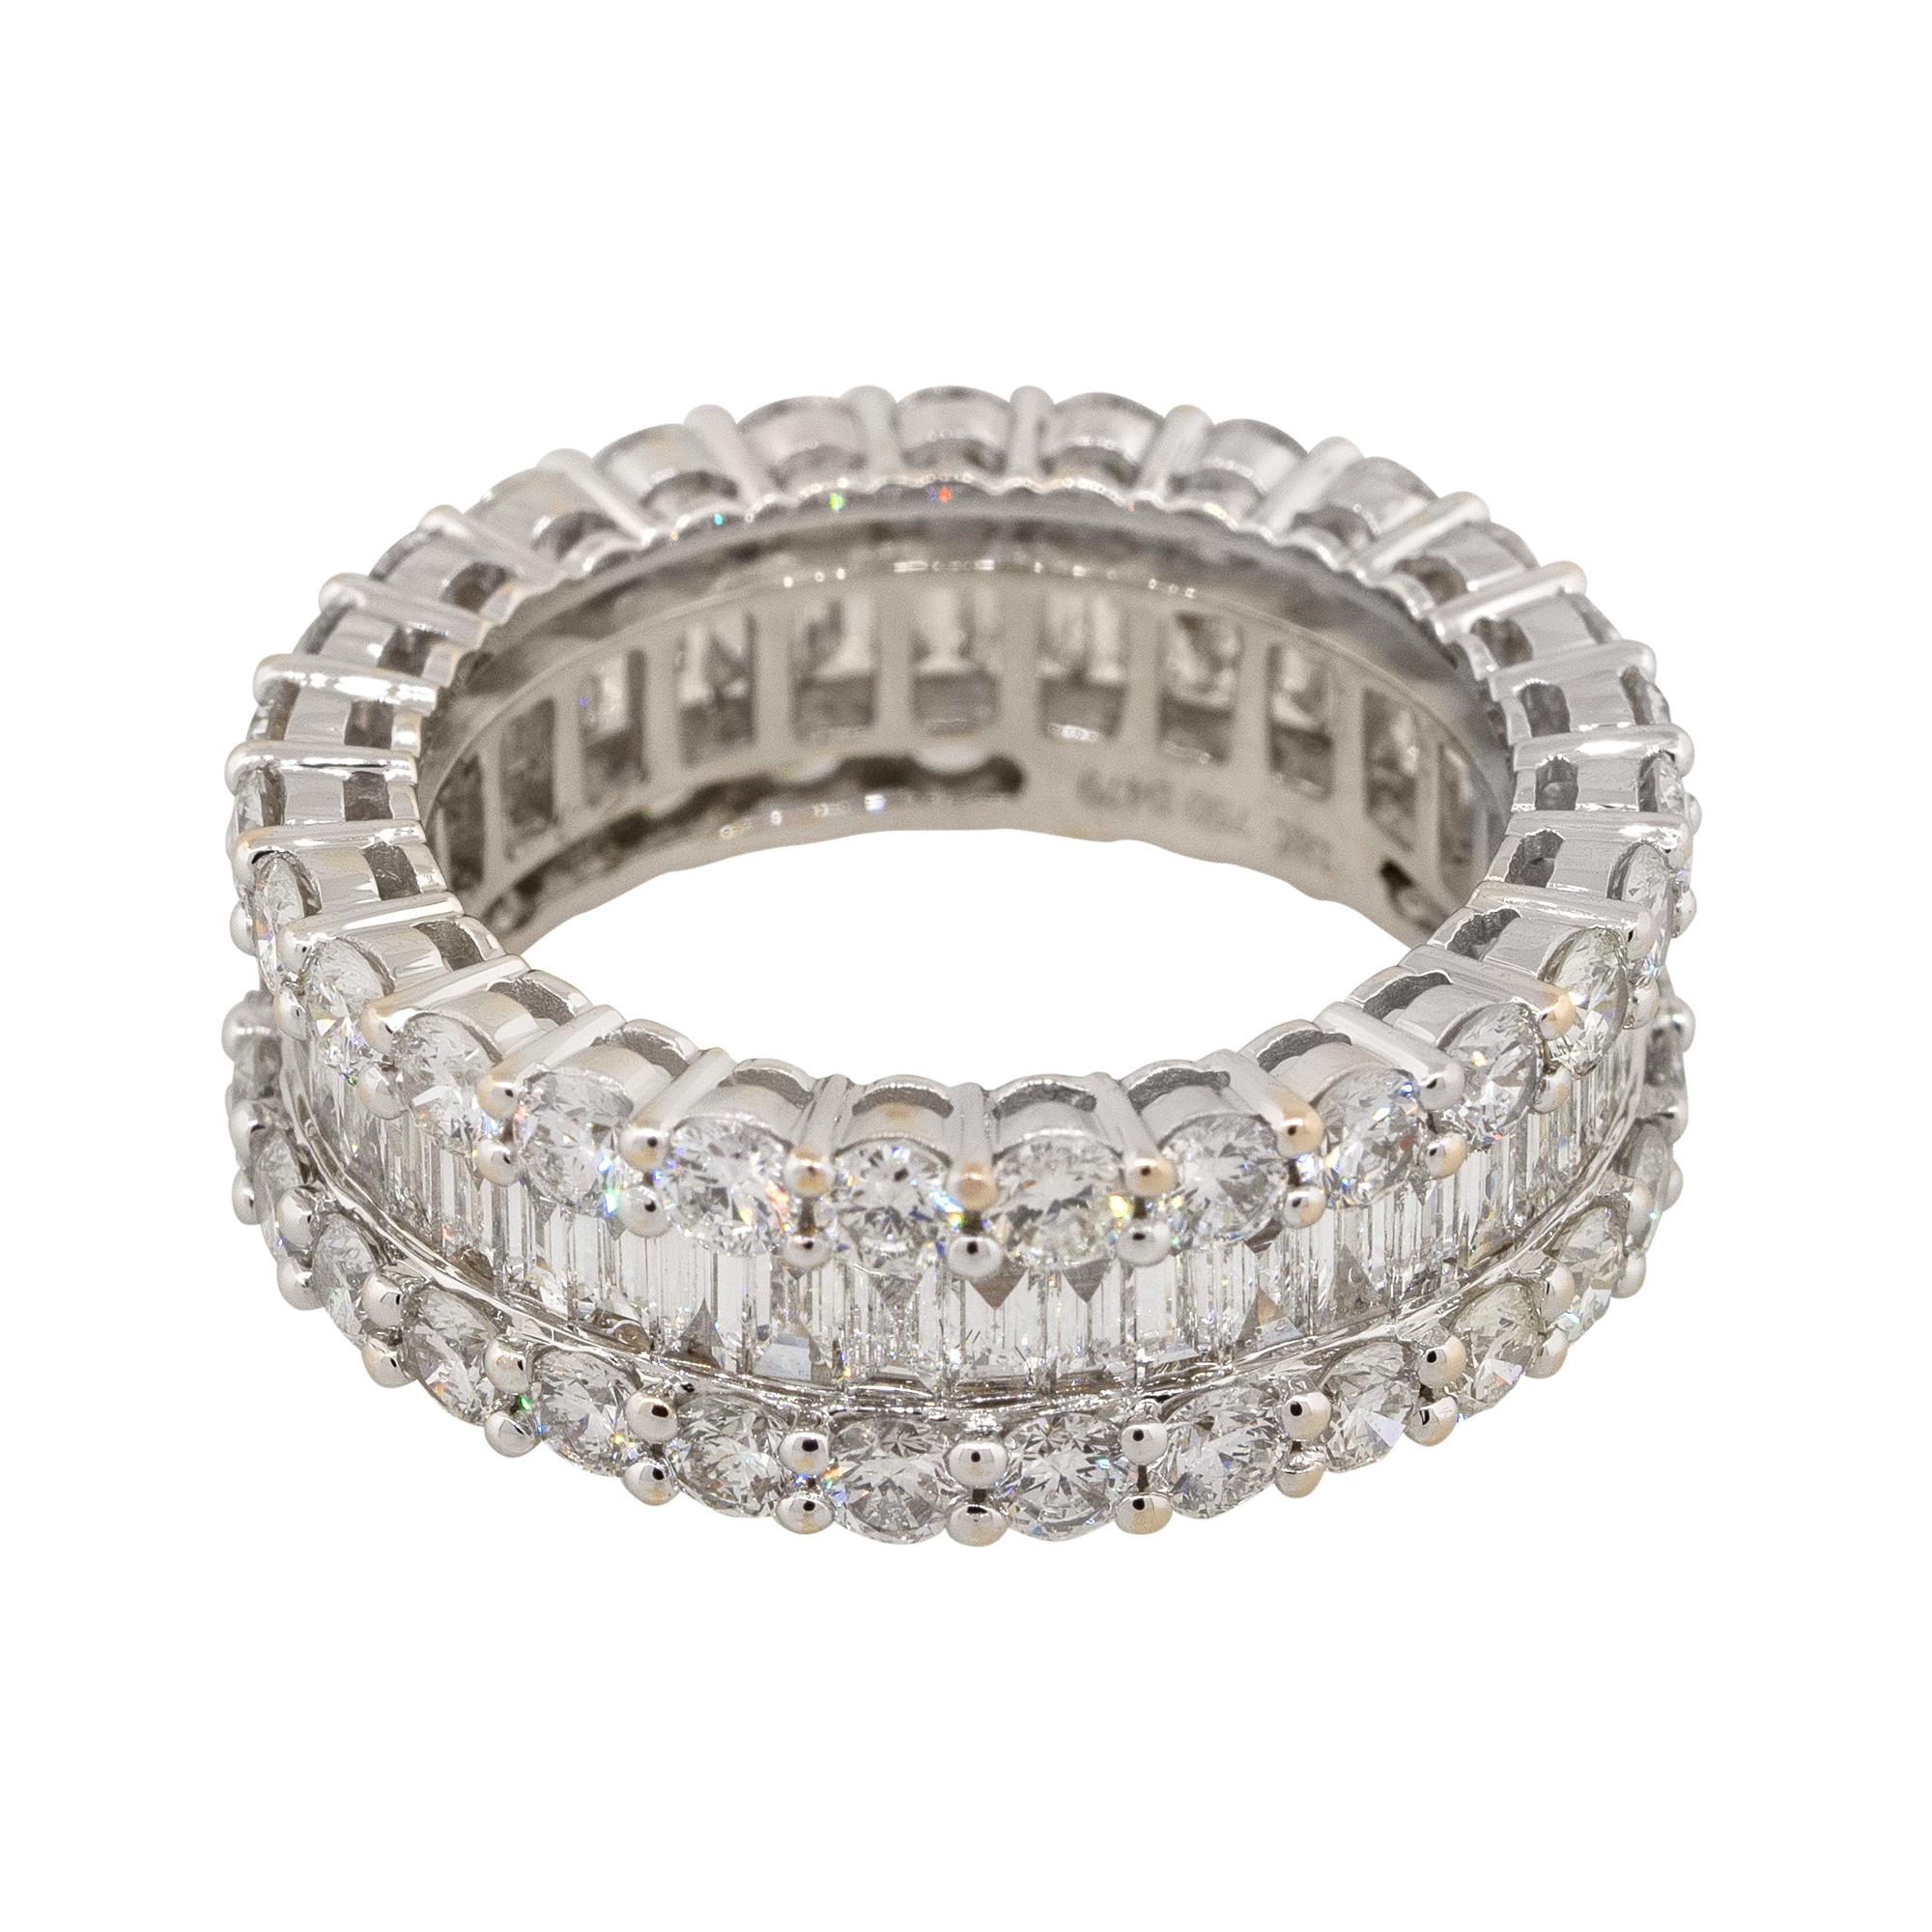 Material: 18k white gold
Diamond Details: Approx. 3.18ctw of round cut Diamonds. Diamonds are G/H in color and VS in clarity
                             Approx. 1.61ctw of baguette cut Diamonds. Diamonds are G/H in color and VS in clarity
Size: